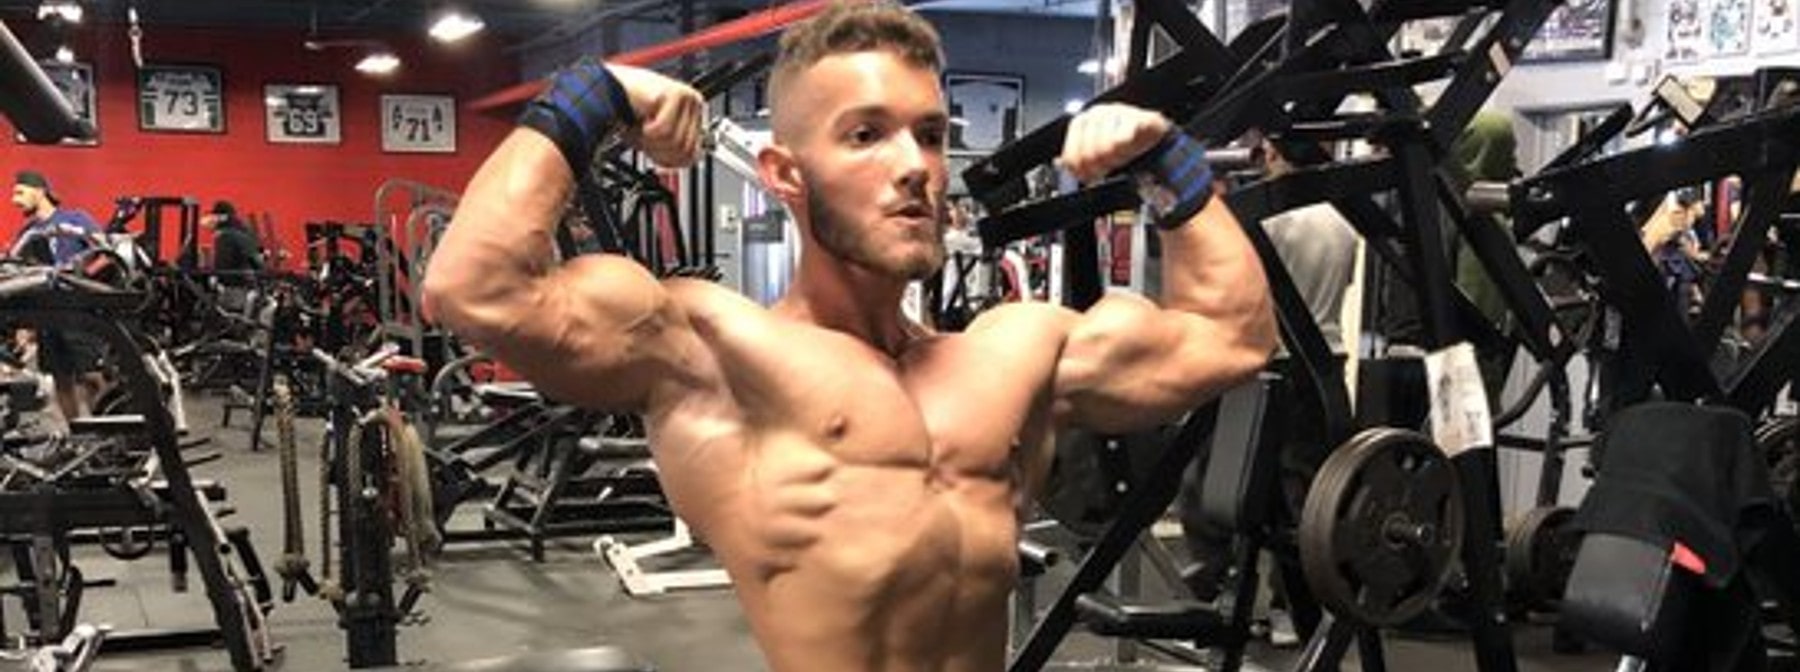 Alex Tilinca Is Changing The Game For Trans Bodybuilders